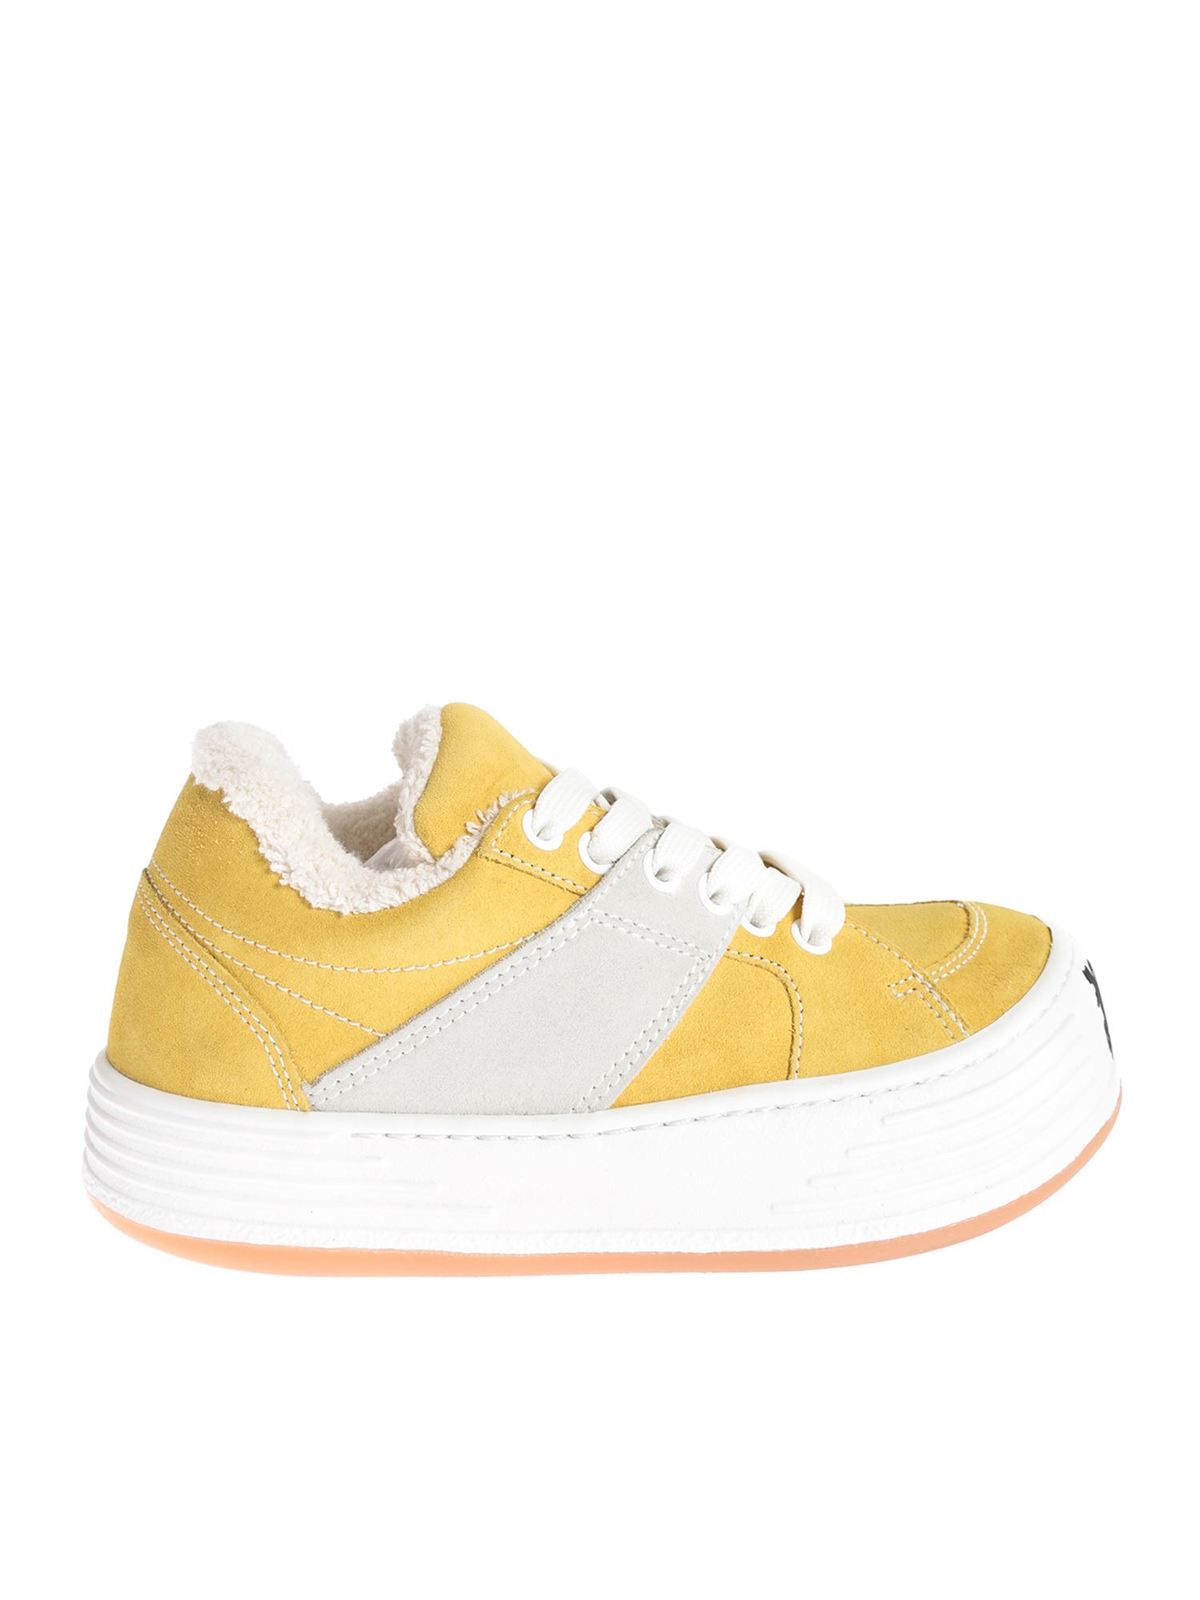 PALM ANGELS LOW TOP SNEAKERS IN YELLOW